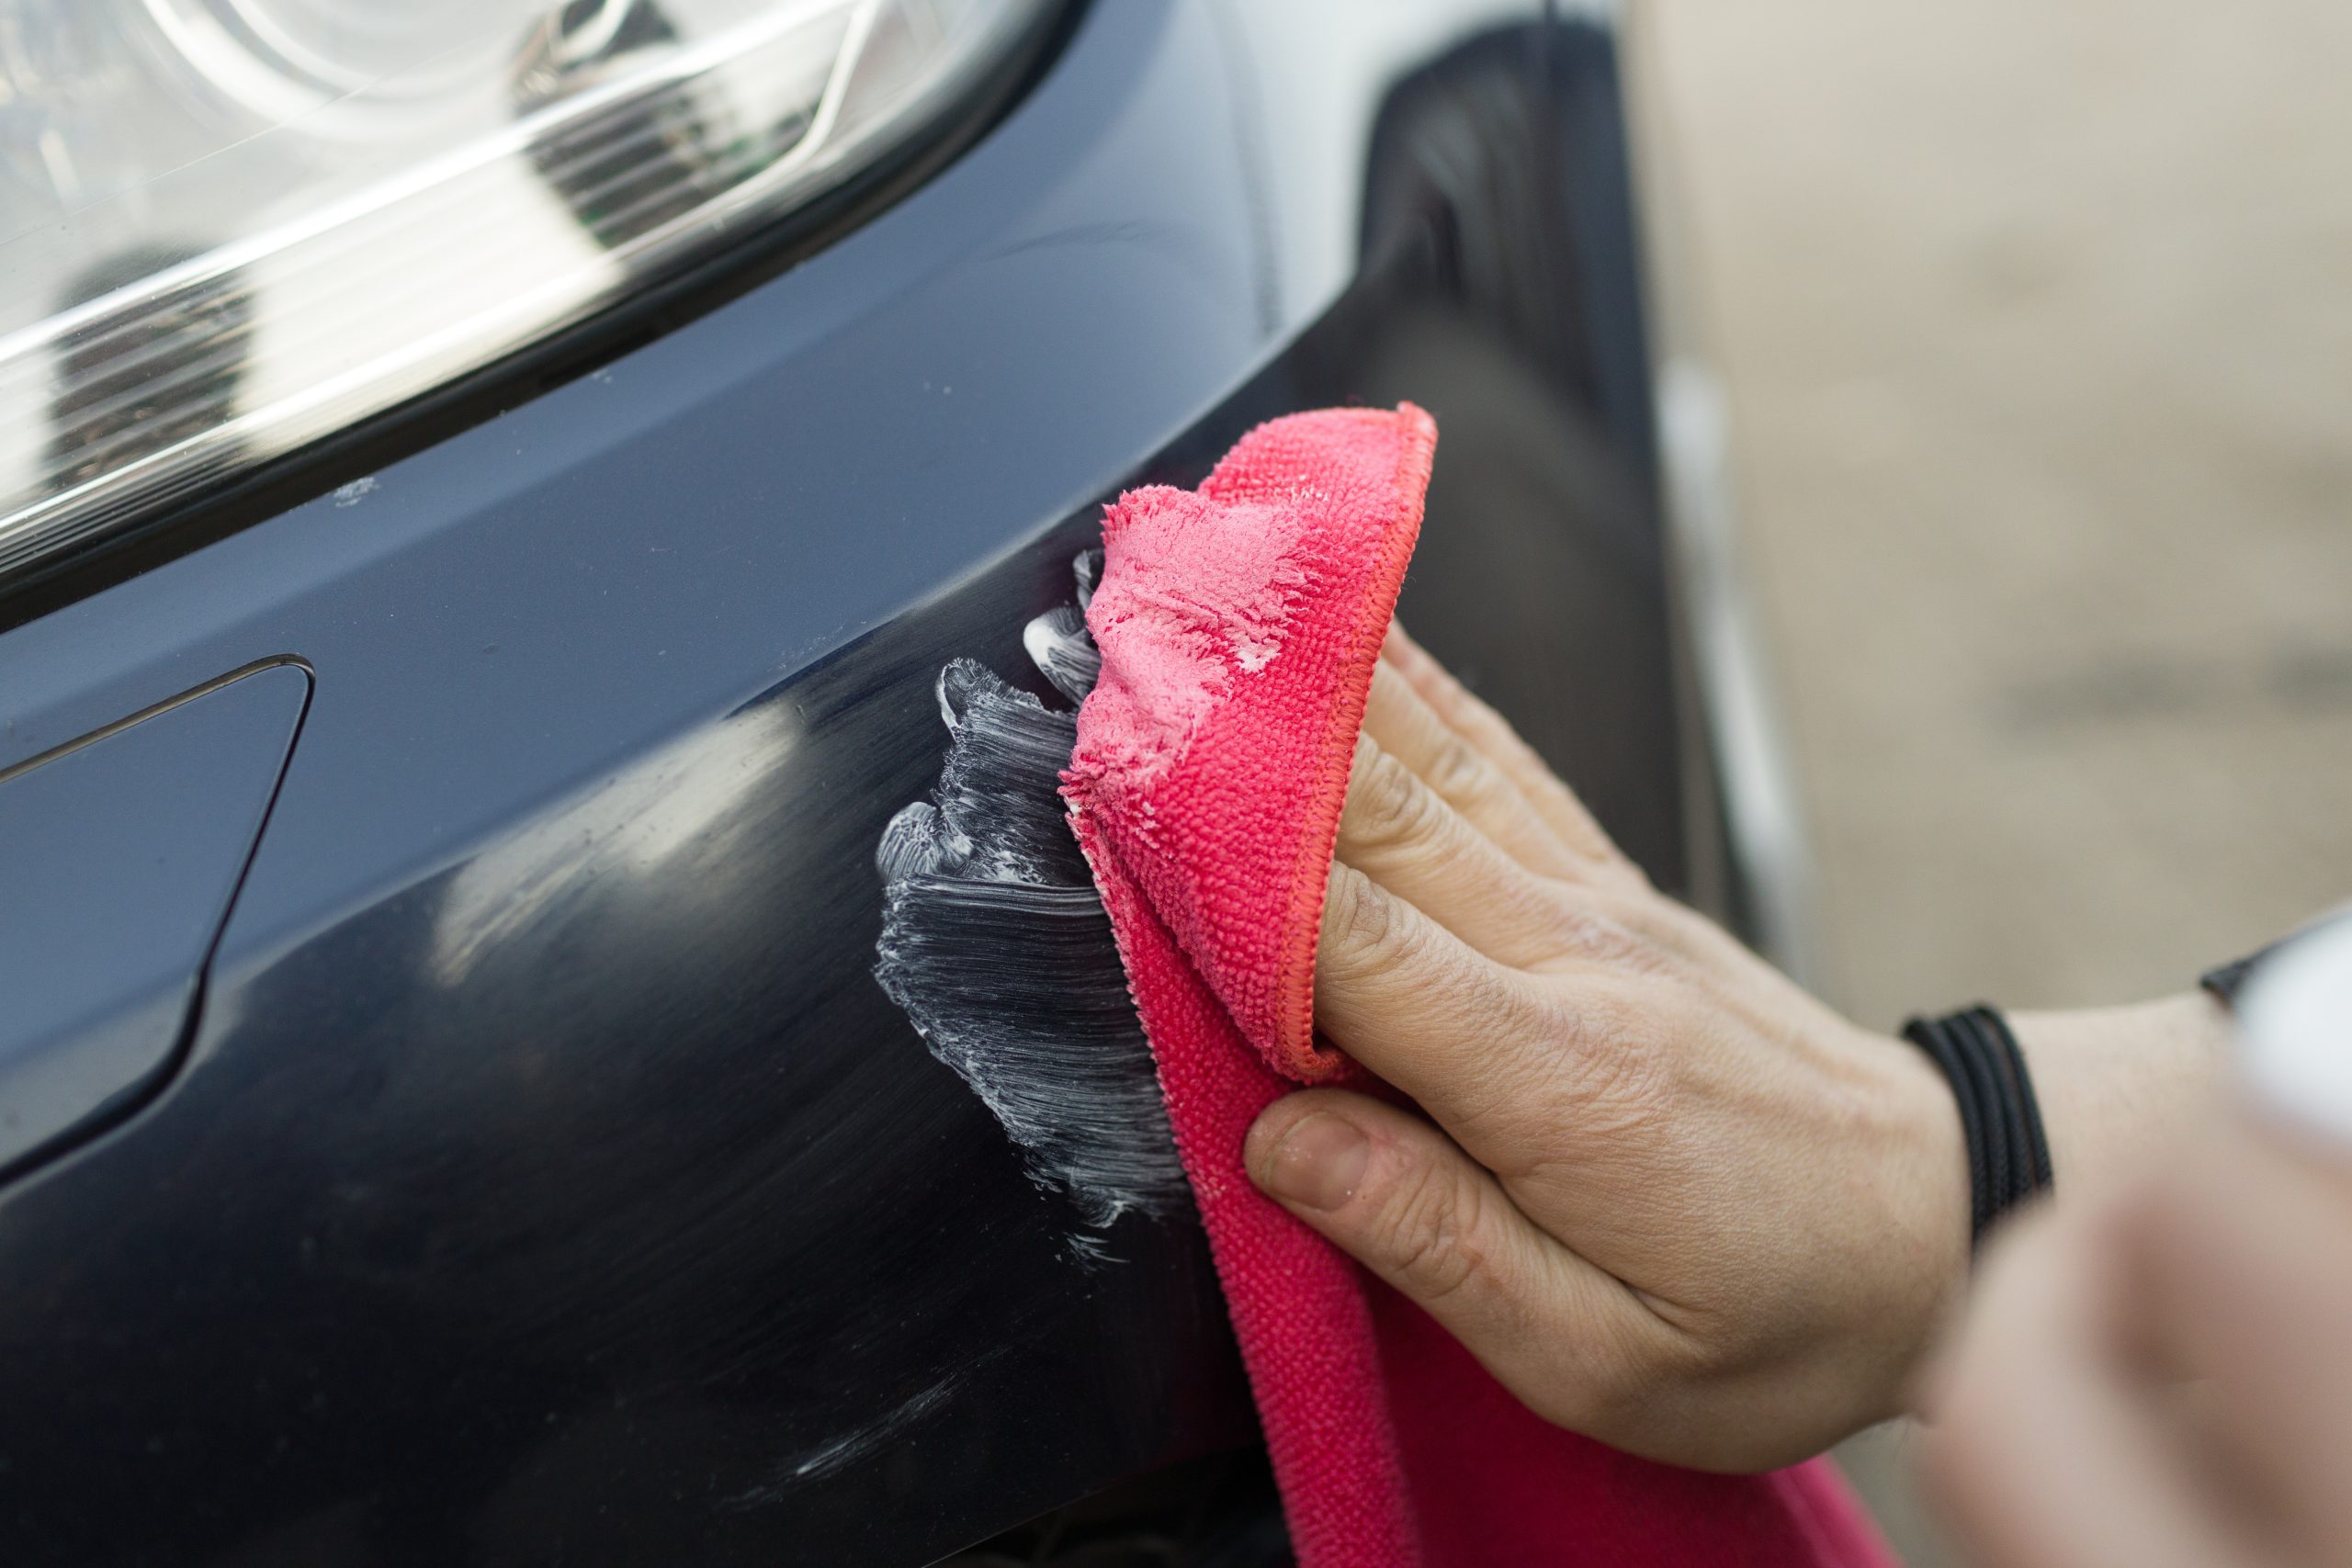 How to Remove Scratches from Car: Best Tips and Tricks